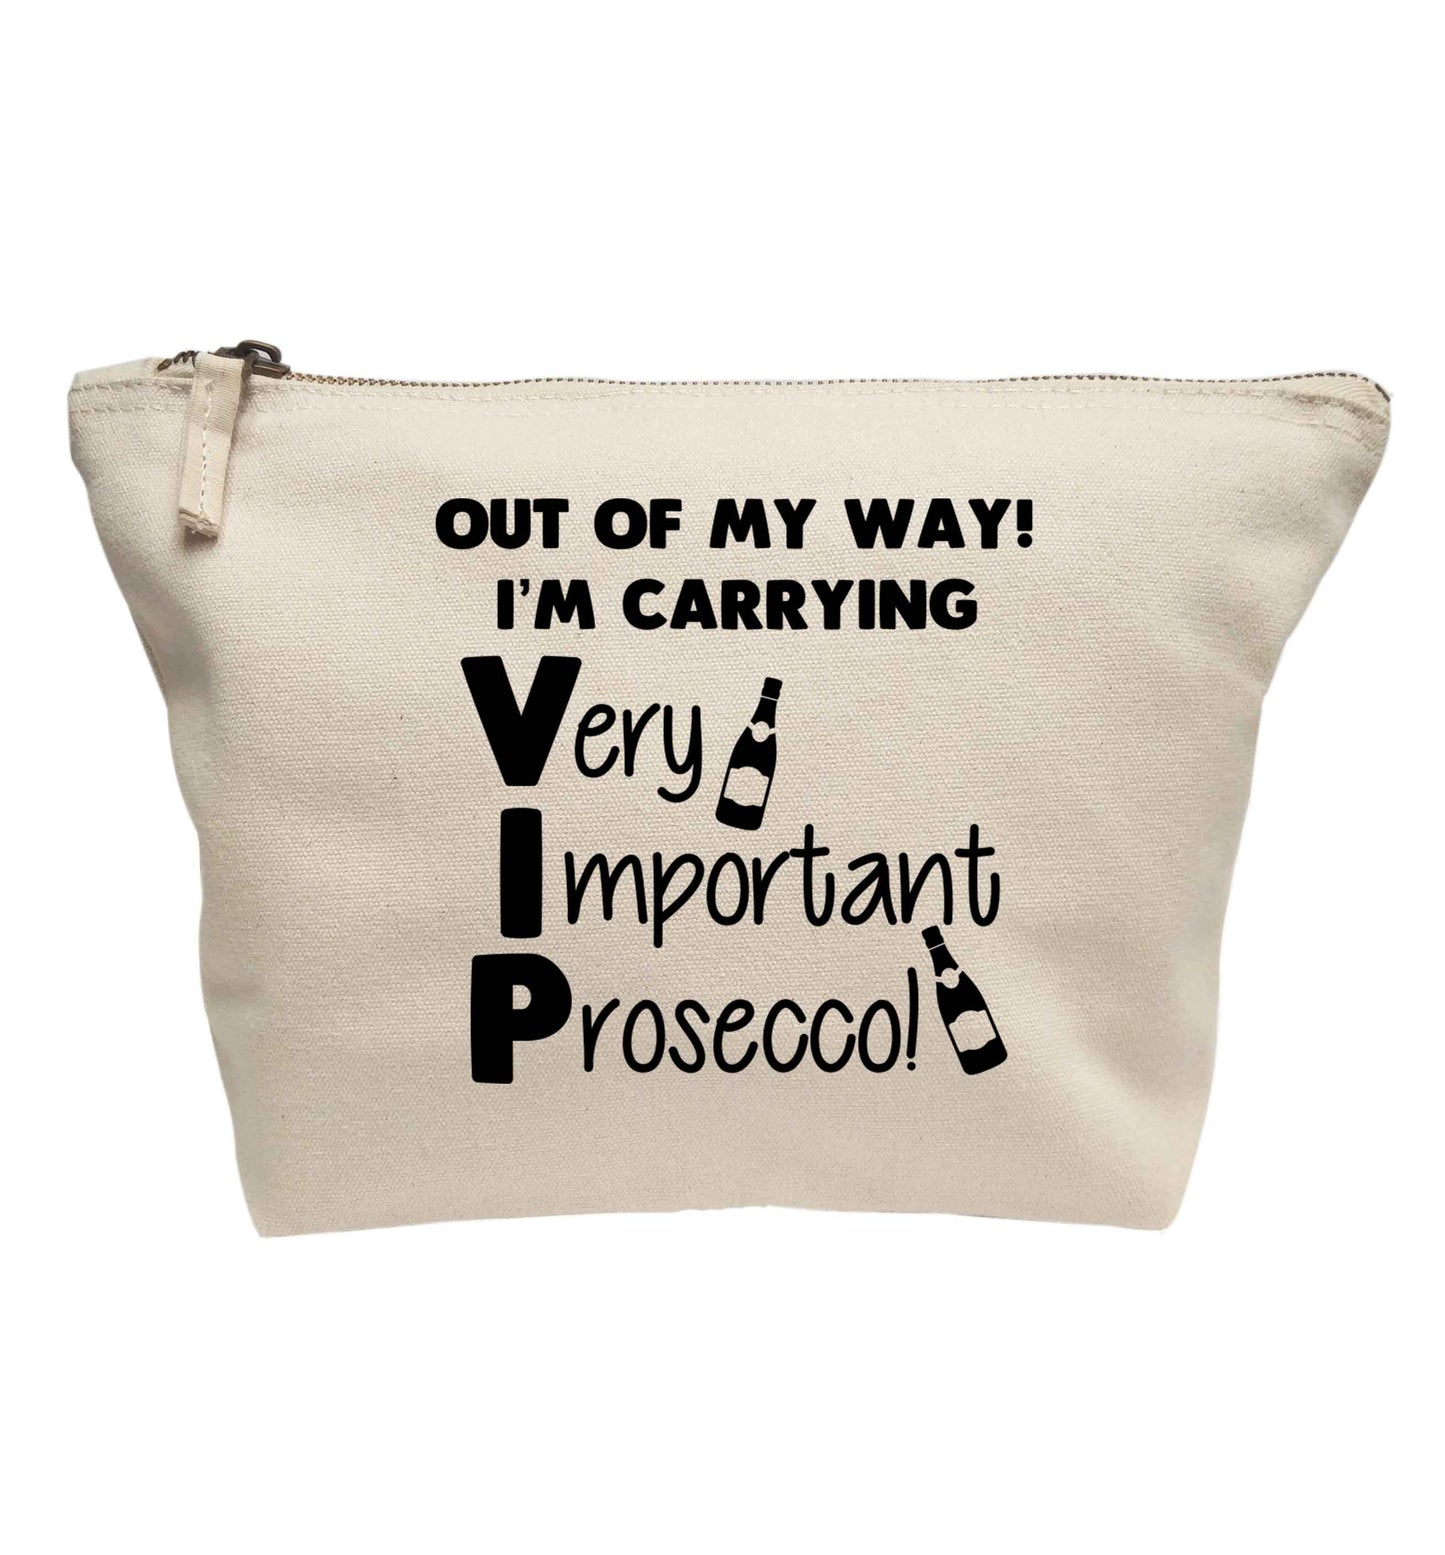 Out of my way I'm carrying very important prosecco! | Makeup / wash bag